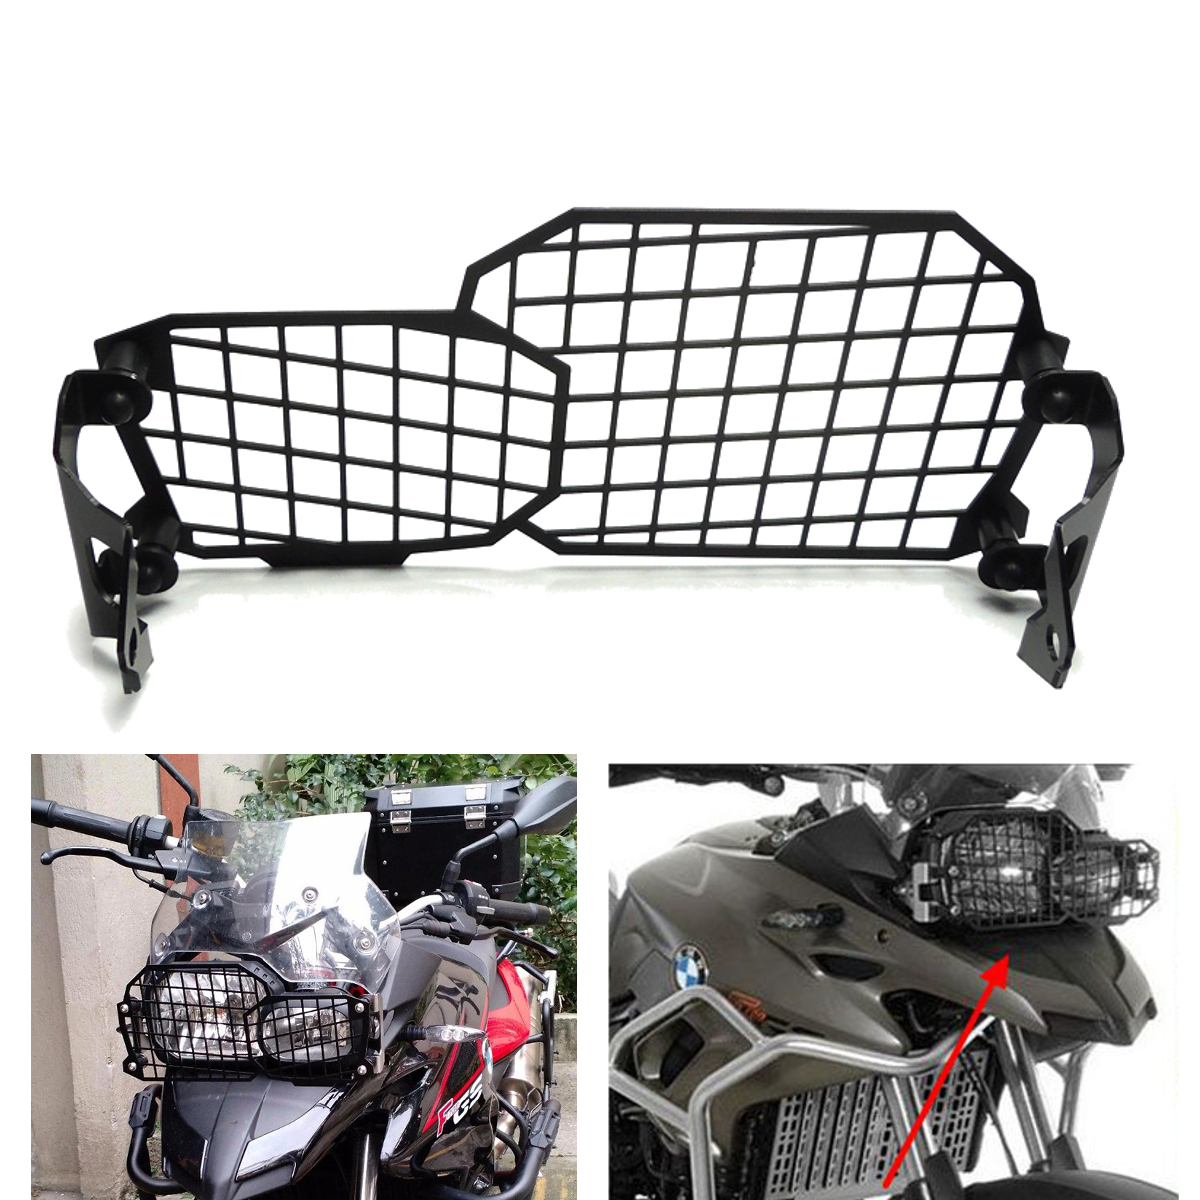 

Motorcycle Headlight Bracket Lamp Grill Protector Guard For BMW F650GS F700GS F800GS